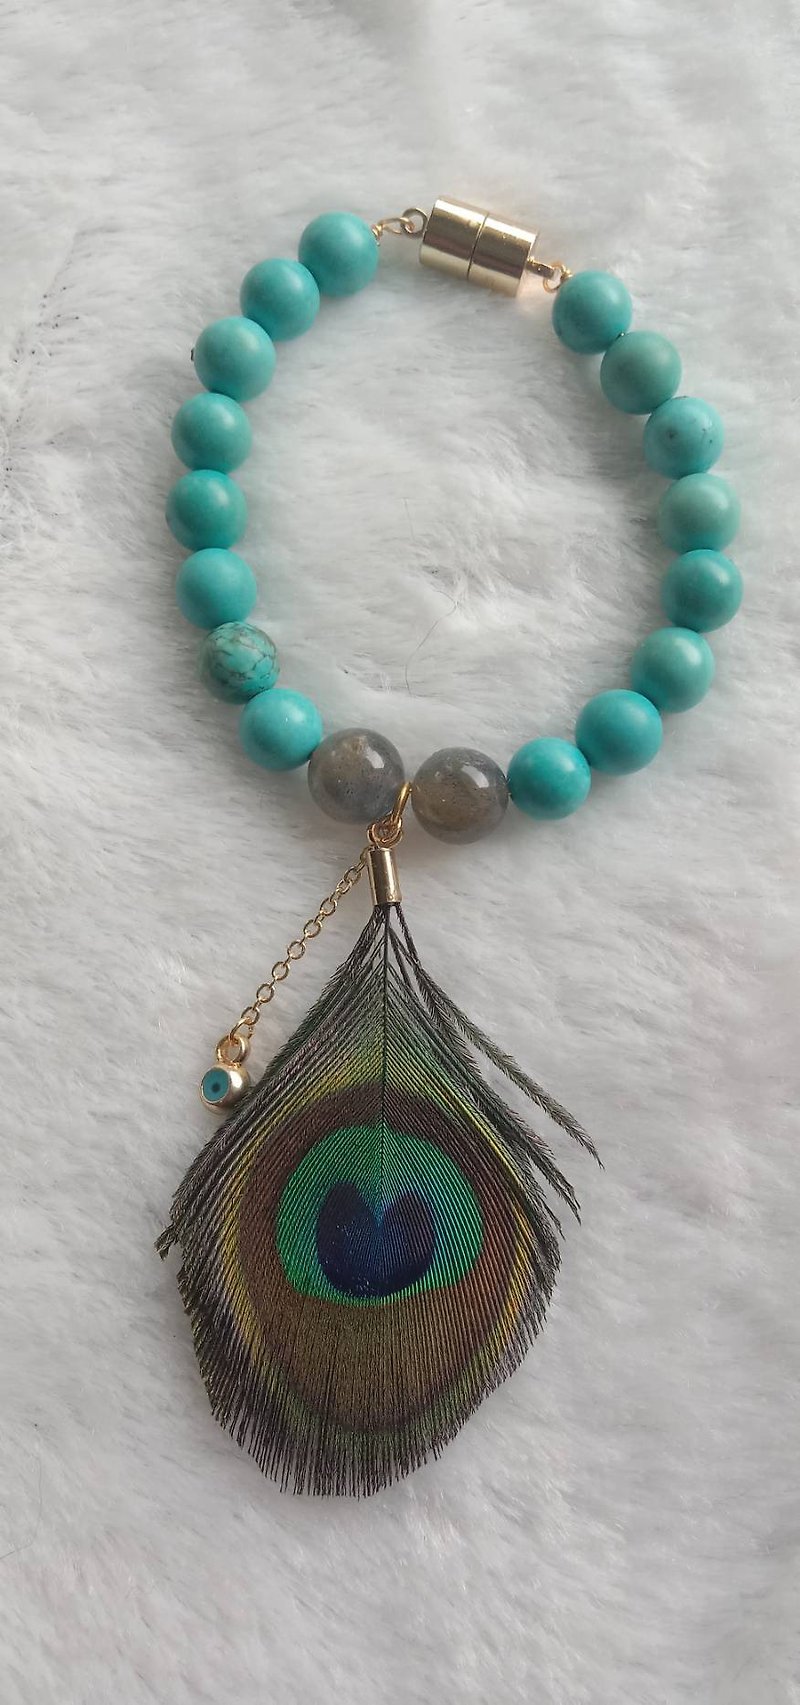 Turquoise braclet with peacock - Bracelets - Stone Multicolor